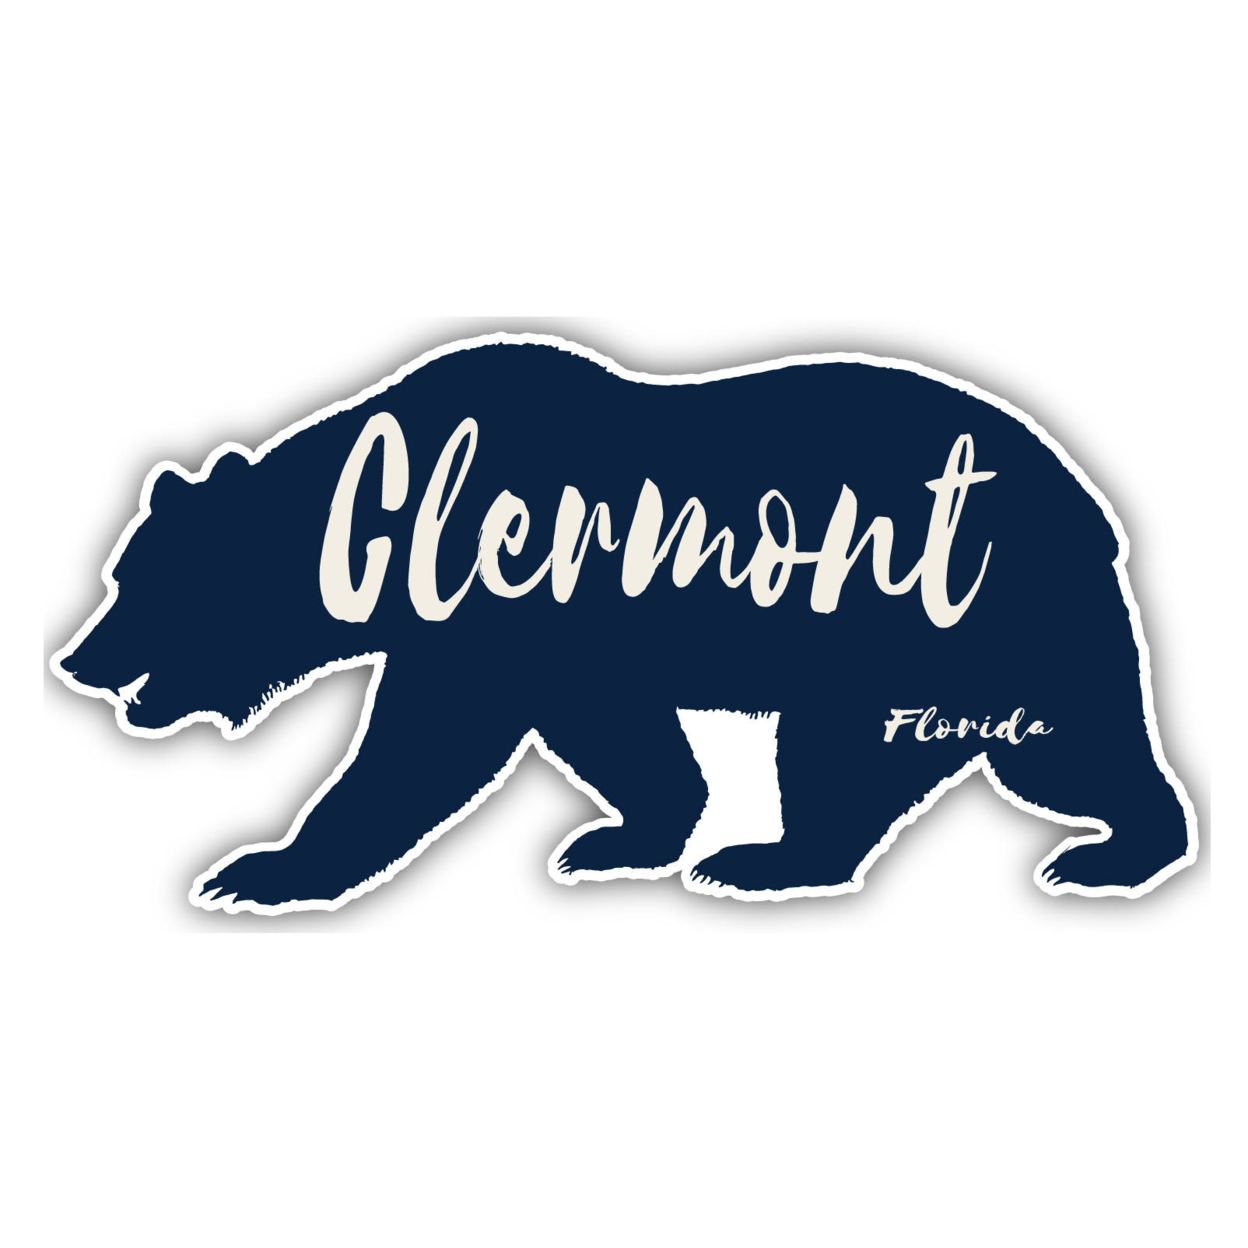 Clermont Florida Souvenir Decorative Stickers (Choose Theme And Size) - 4-Pack, 10-Inch, Bear